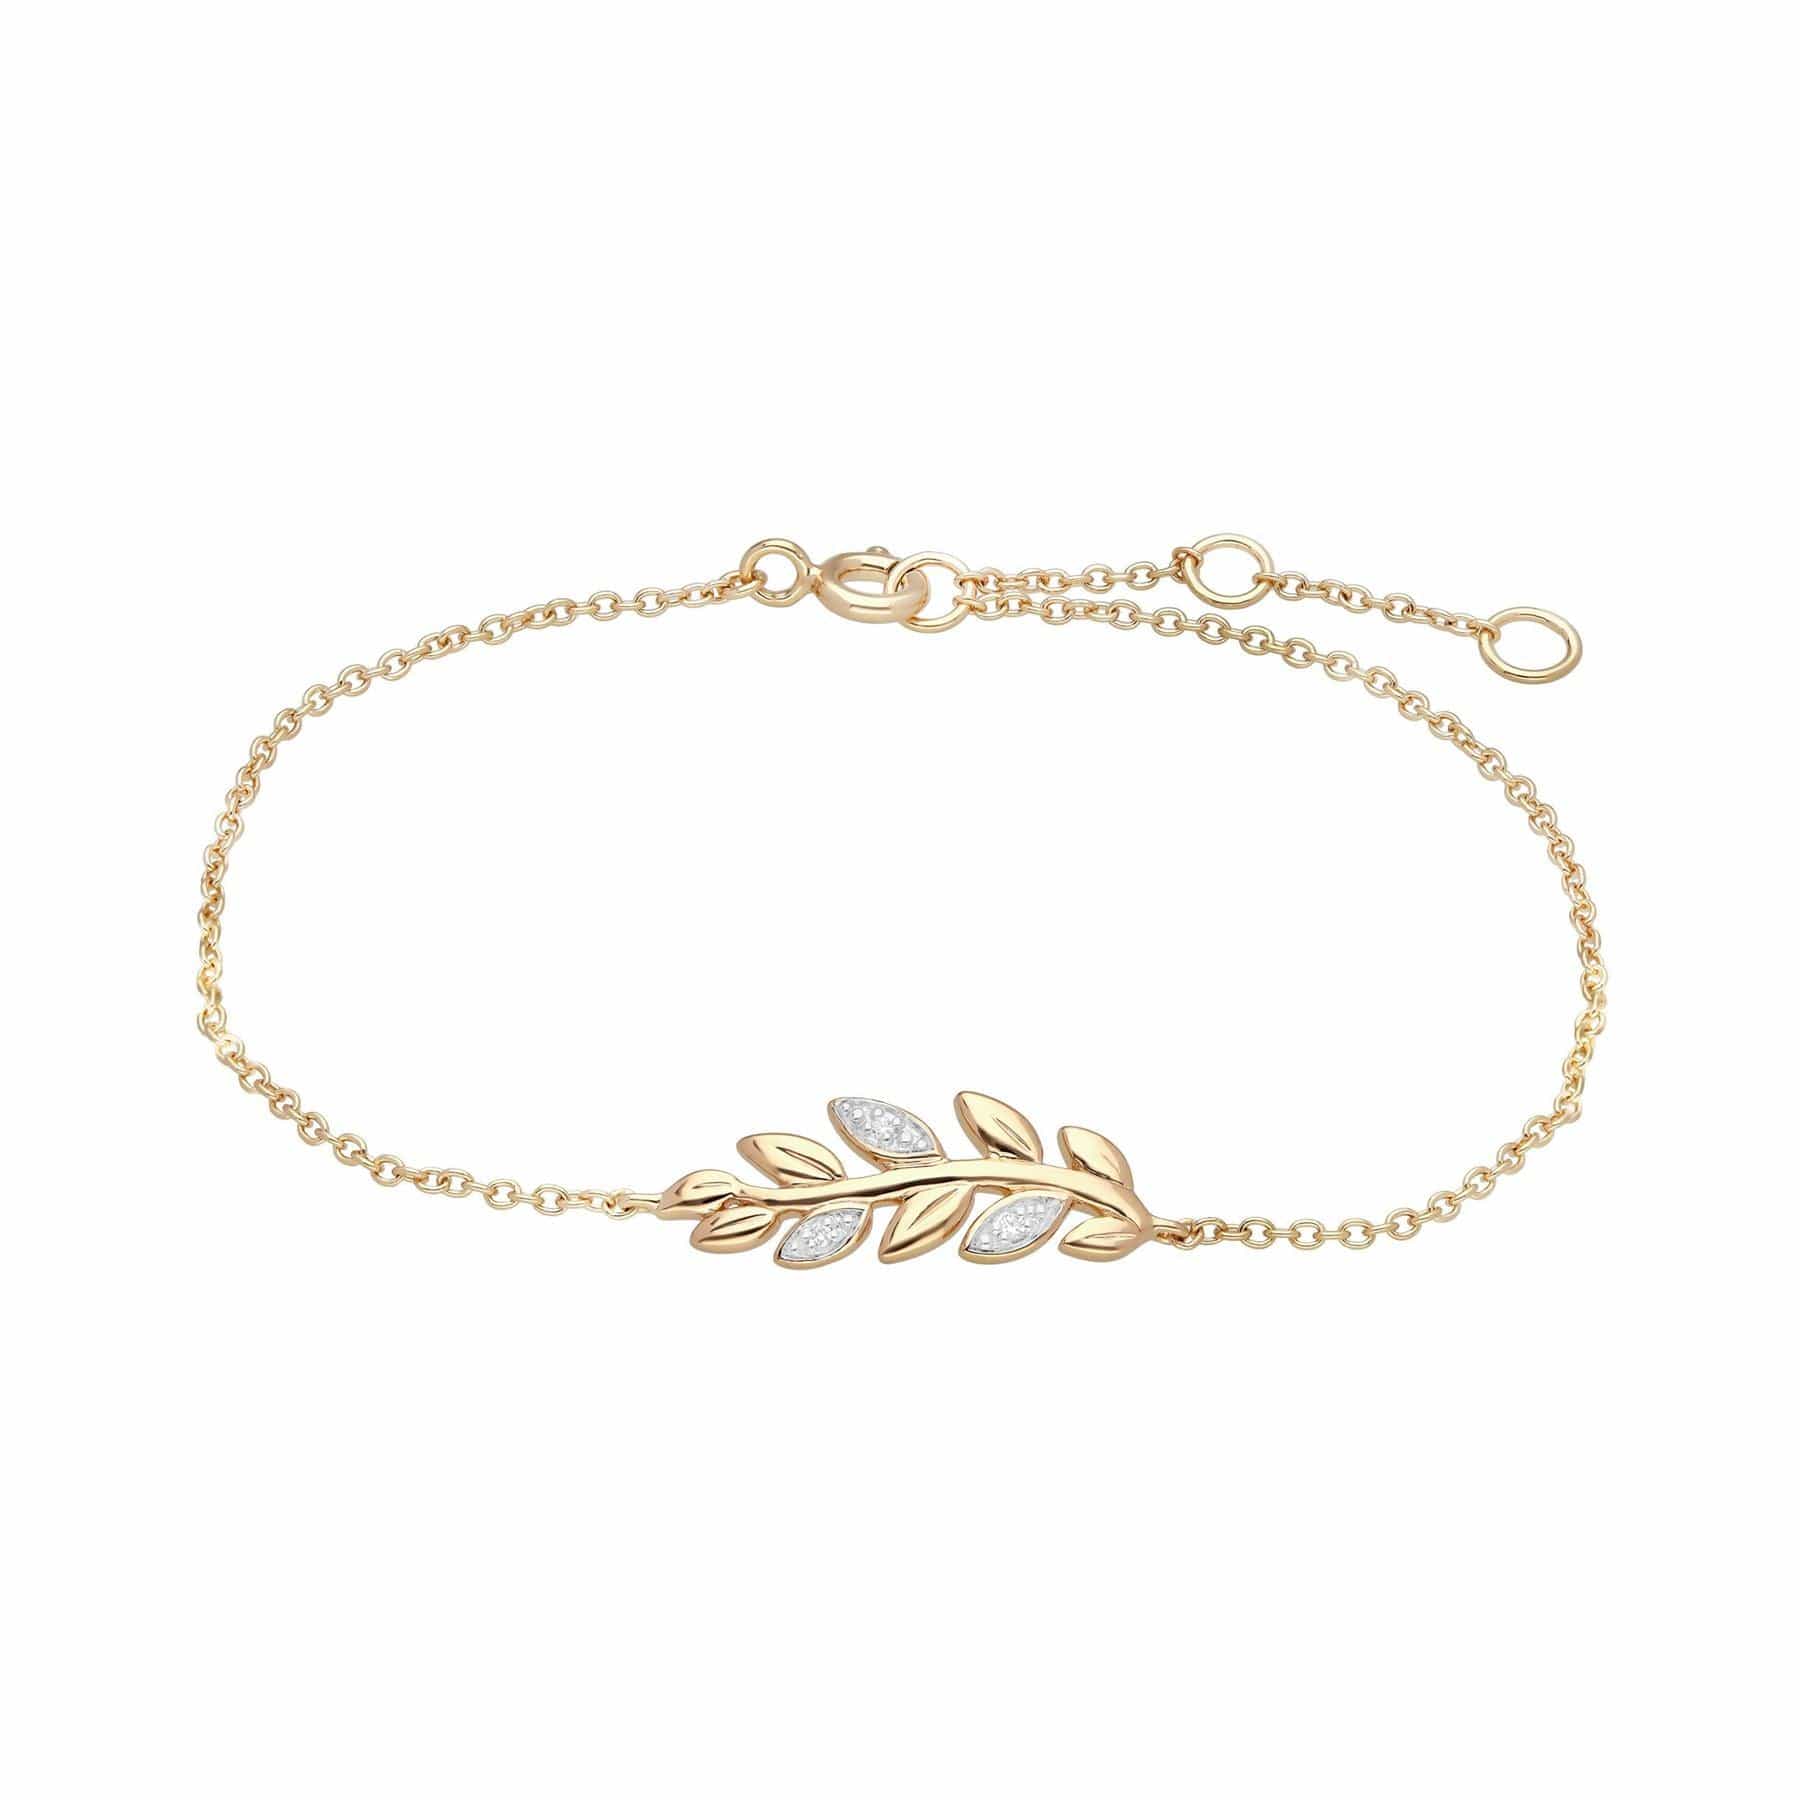 191N0235019-191L0158019 O Leaf Diamond Necklace and Bracelet Set in 9ct Yellow Gold 3